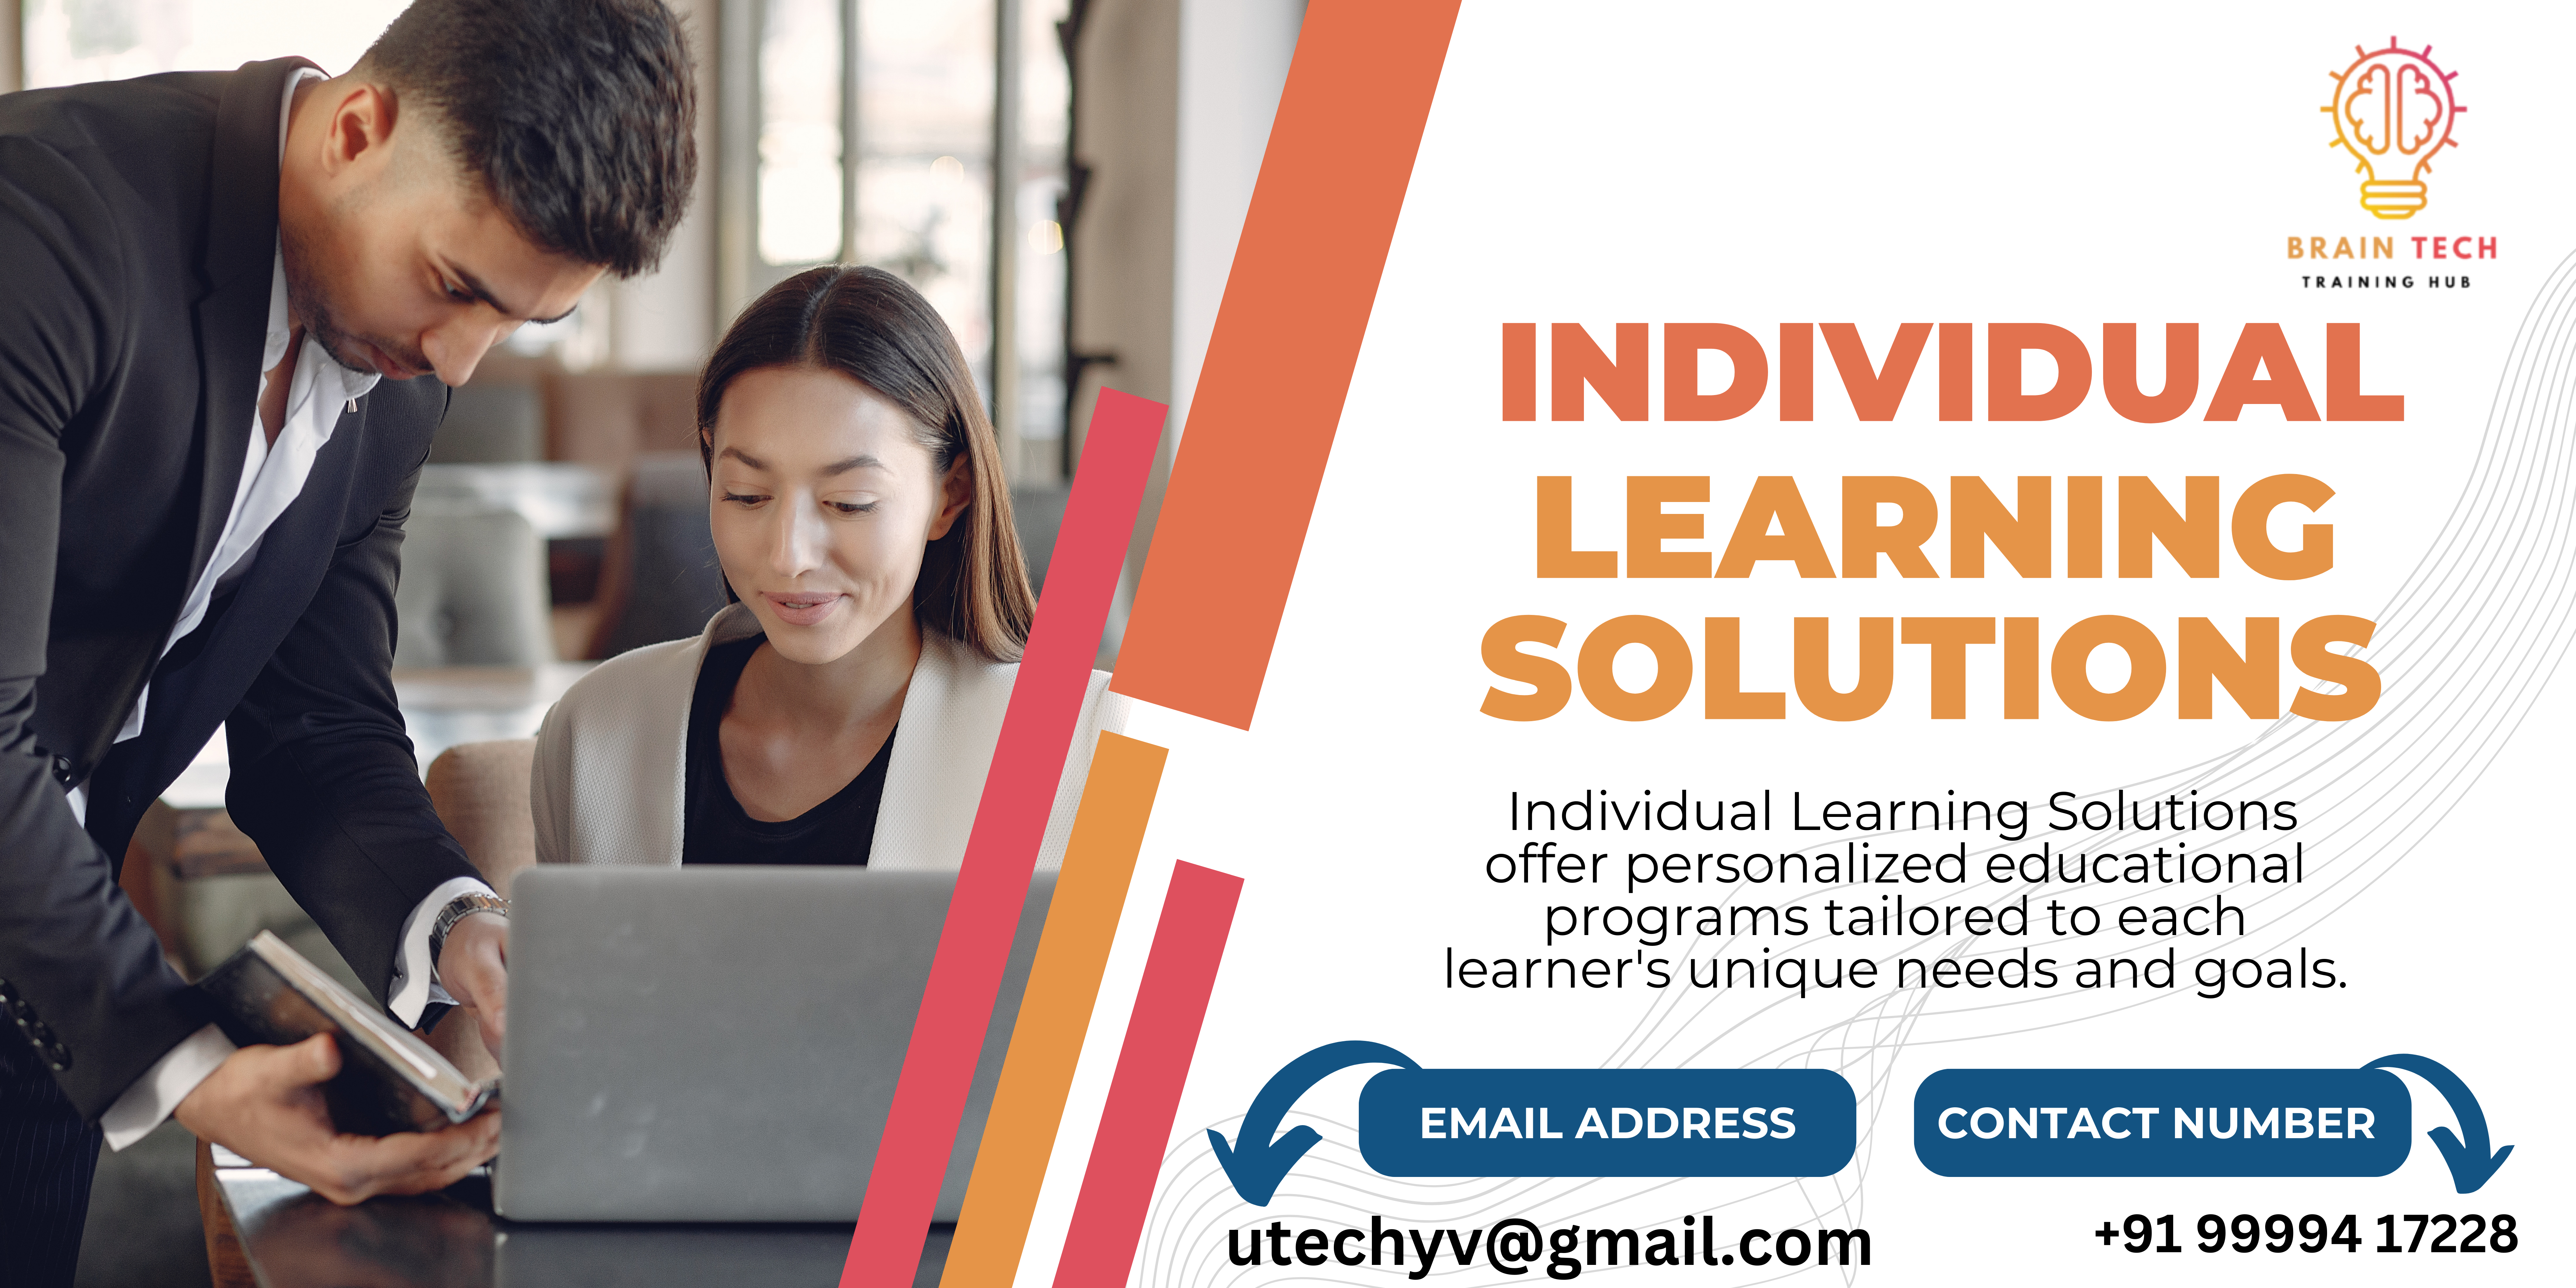 Individual learning solutions